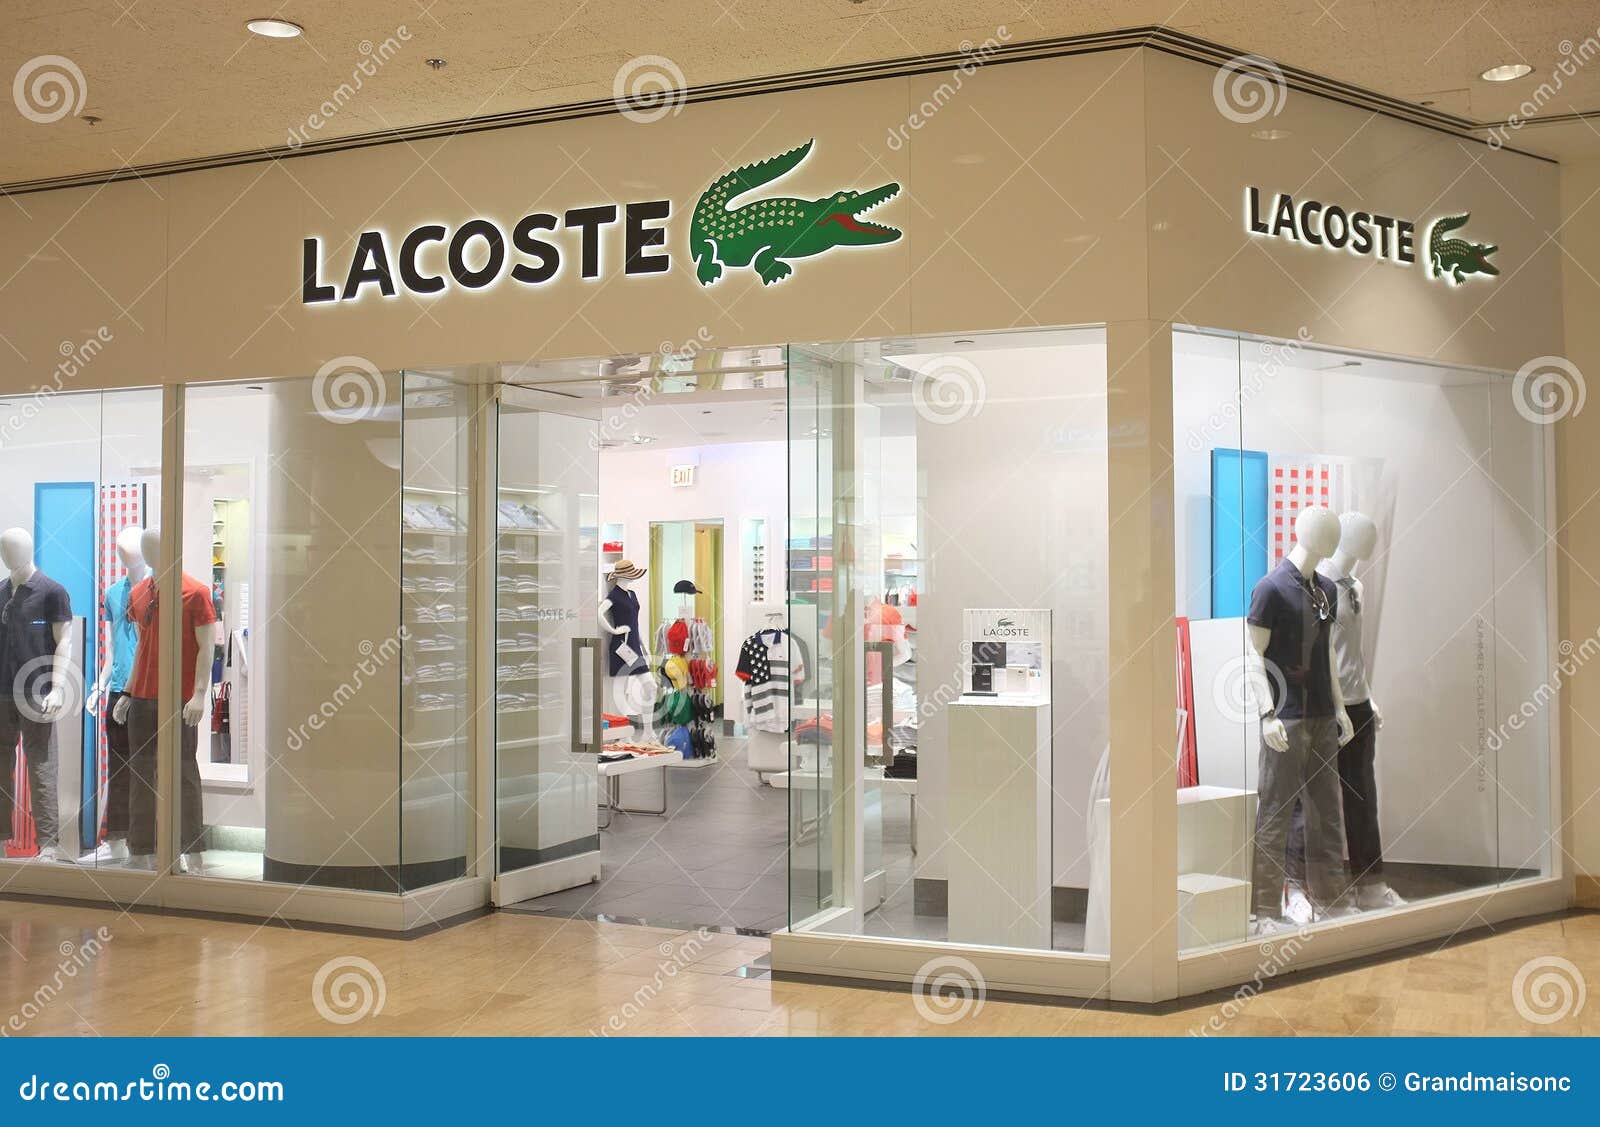 lacoste chicago outlet